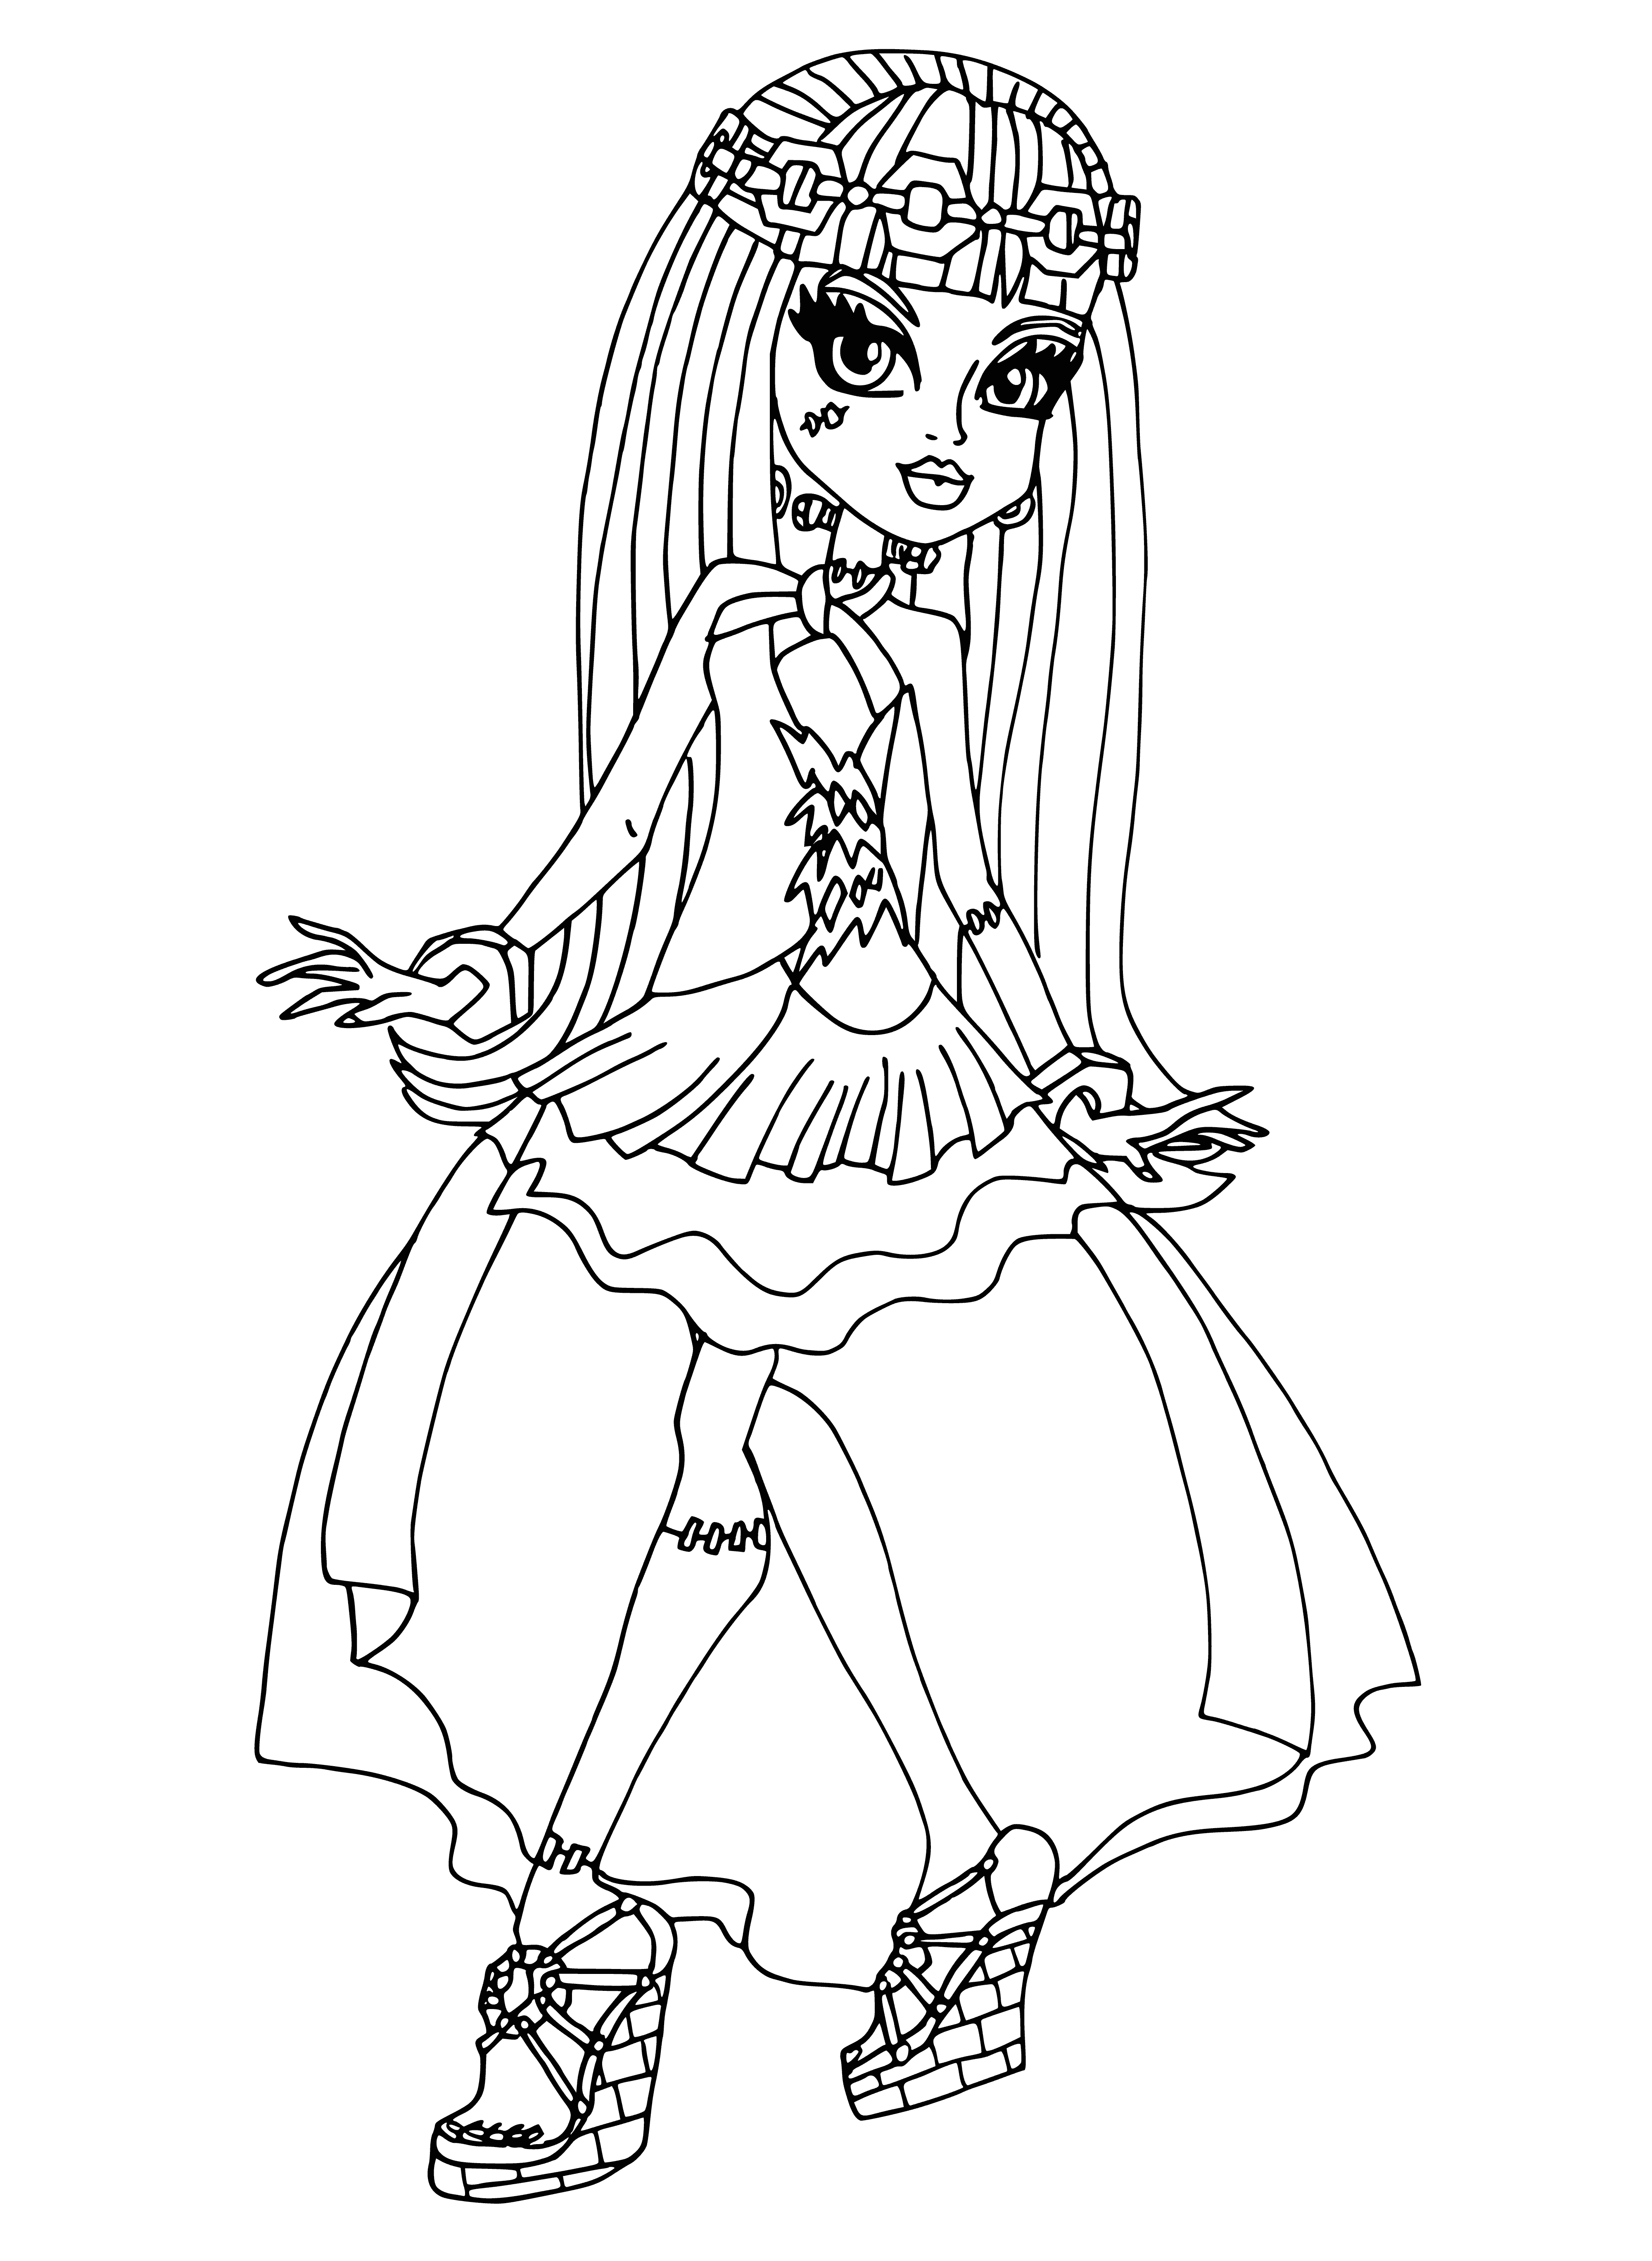 Freckney Stein coloring page